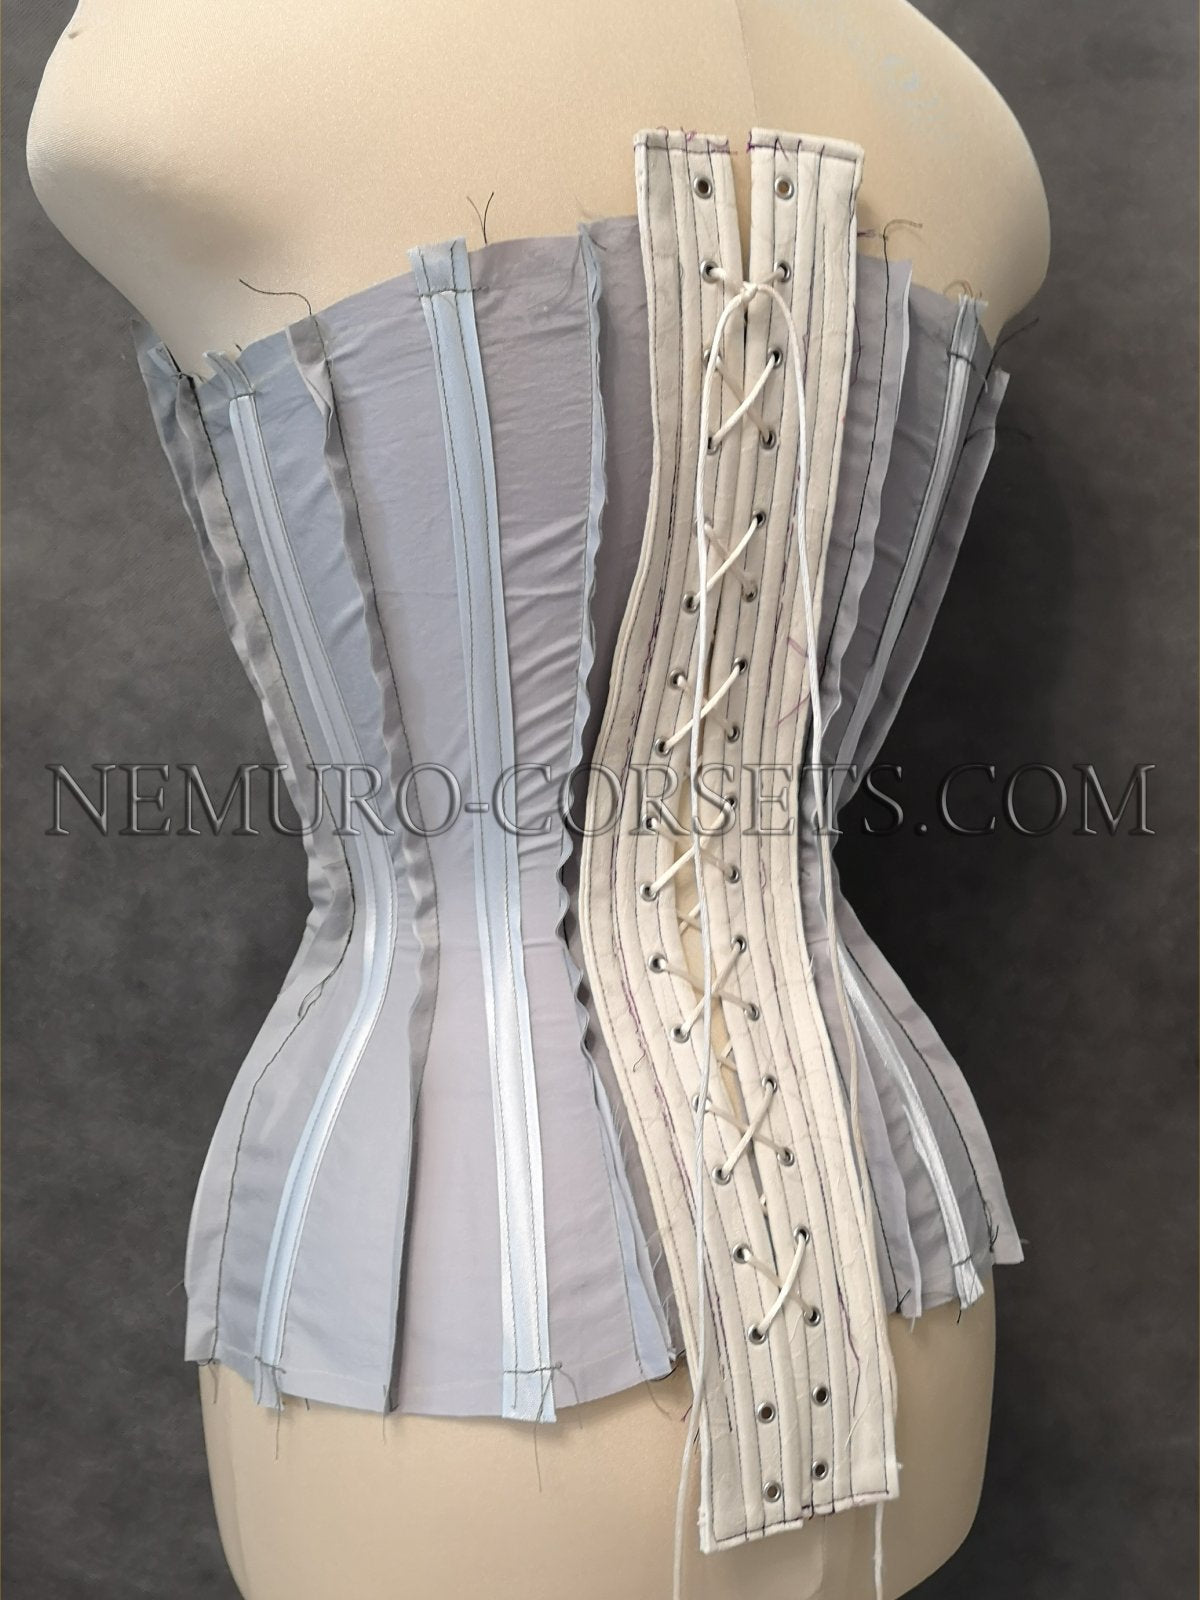 My corset mockup is done and I'm ready to move on to the real deal